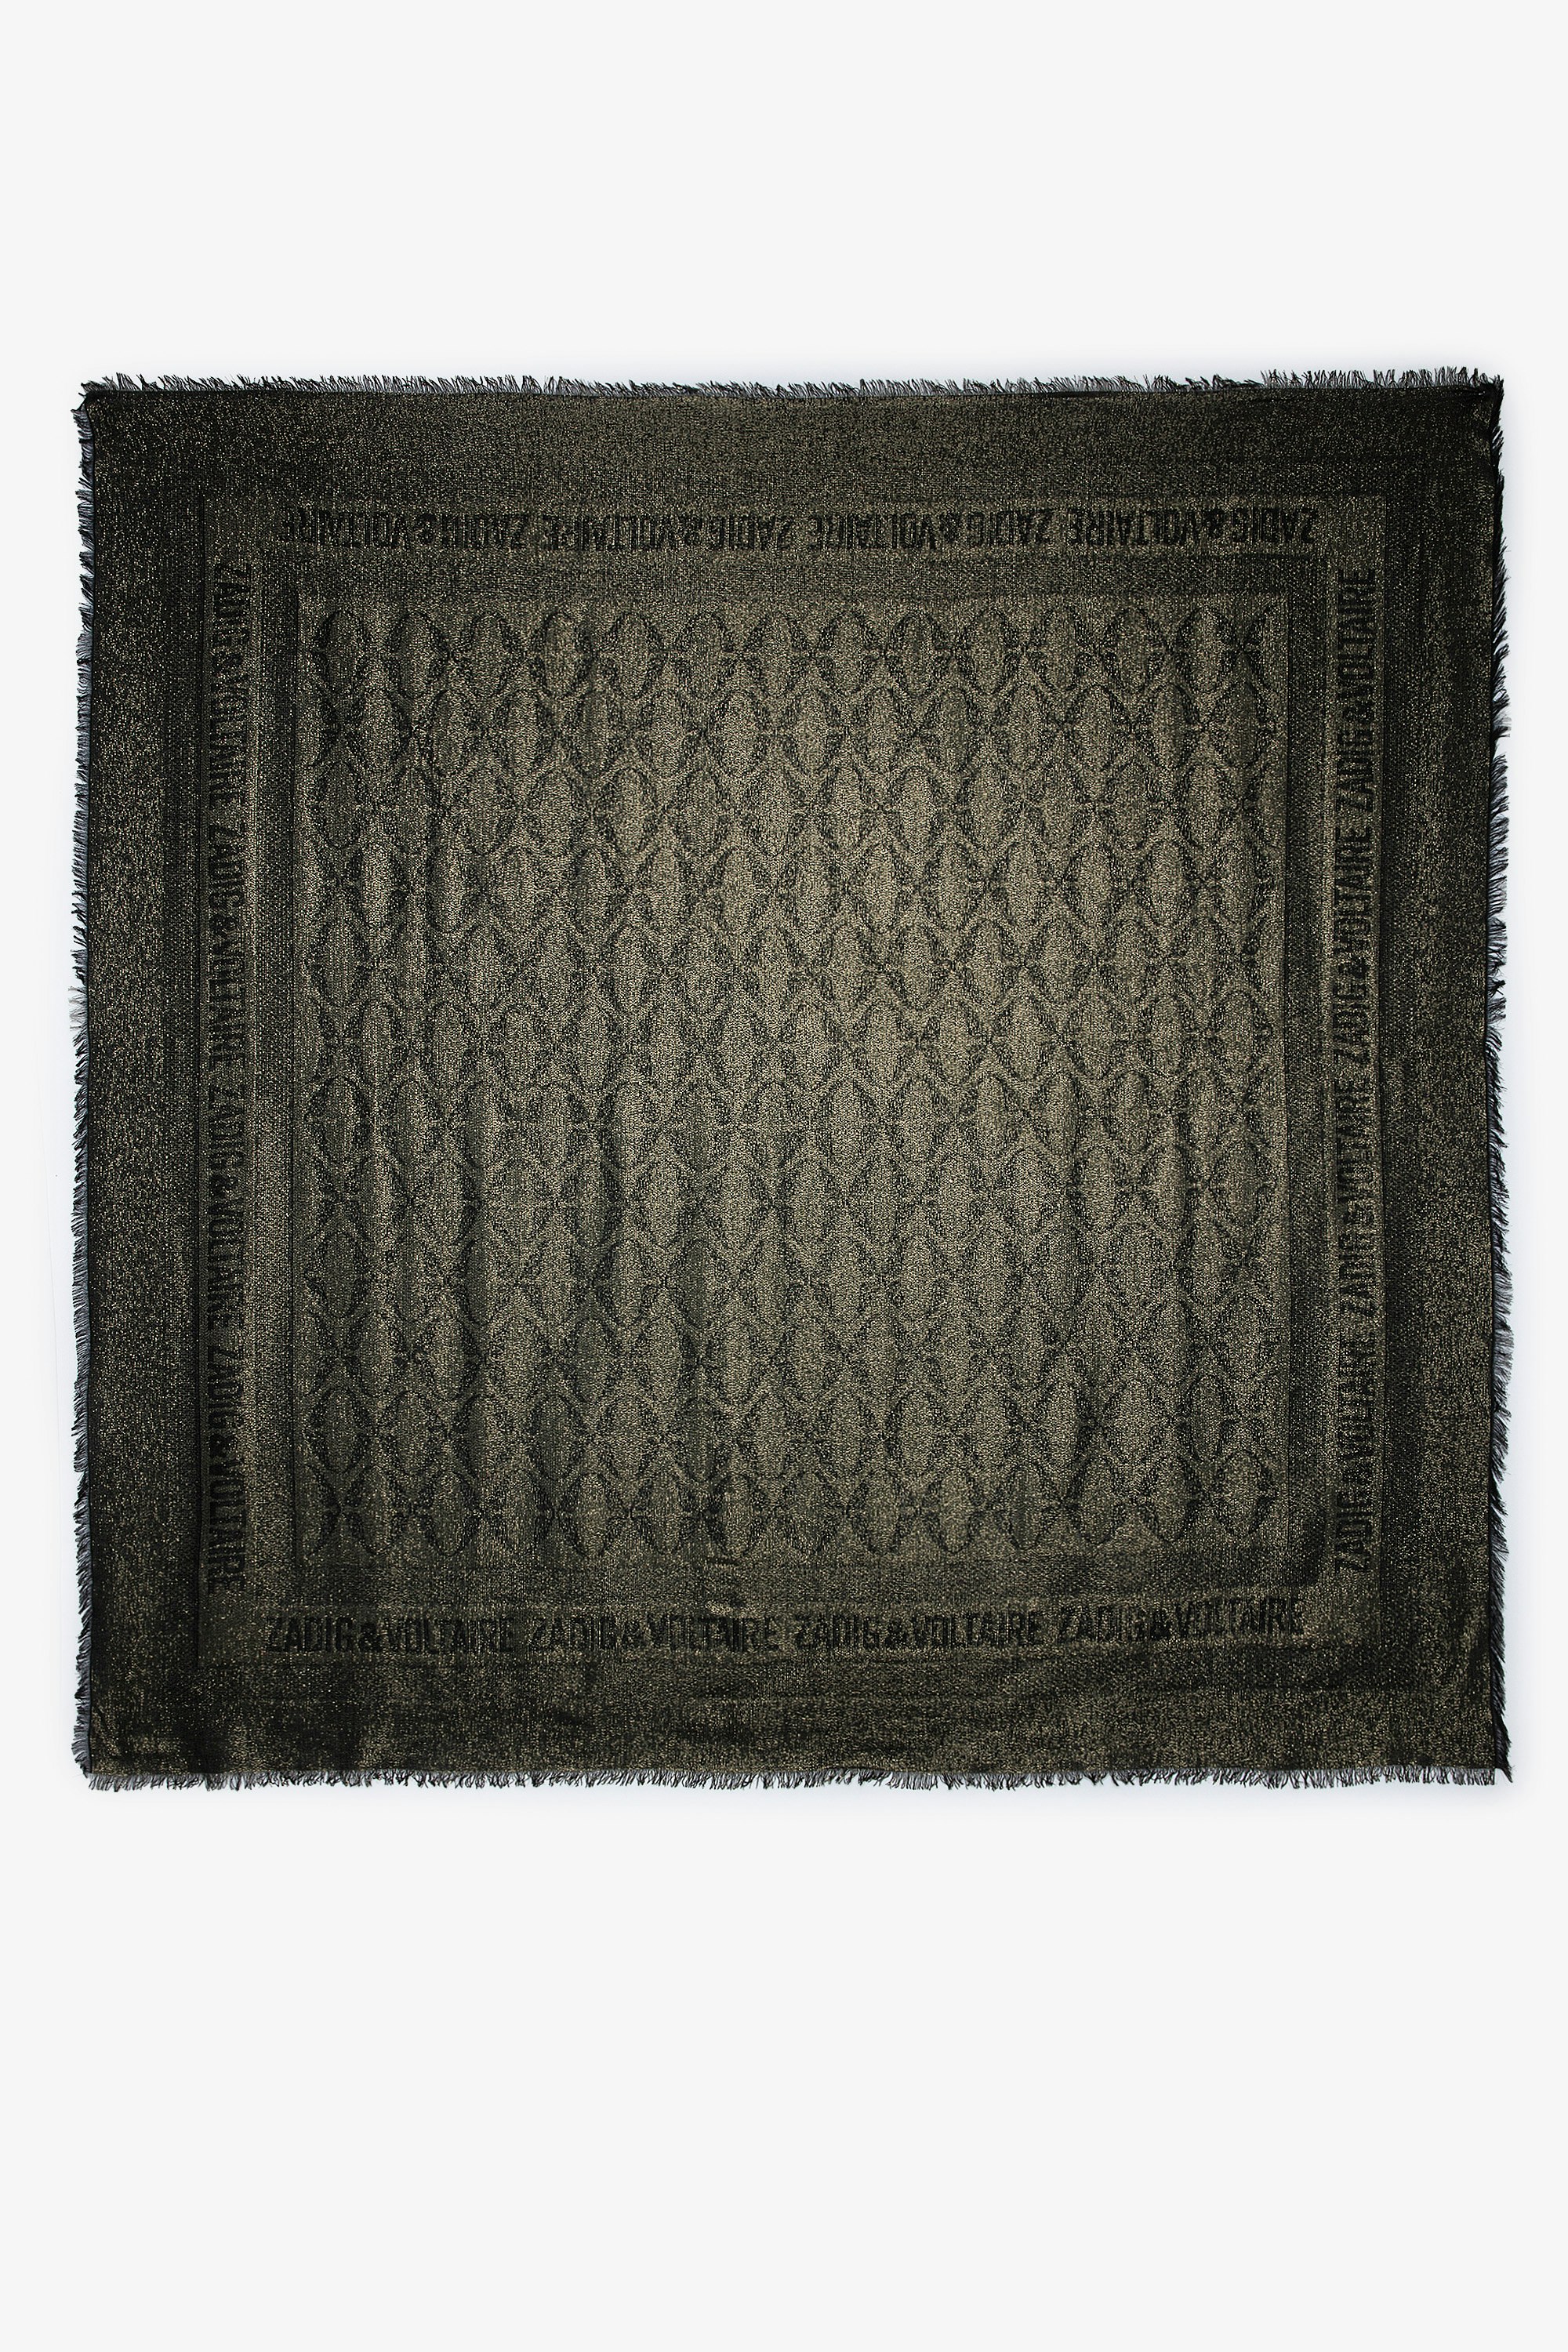 Glenn Rock Lurex Jacquard Scarf - Voltaire Vice square black scarf in gold-effect patterned jacquard with motifs and Zadig&Voltaire signature.